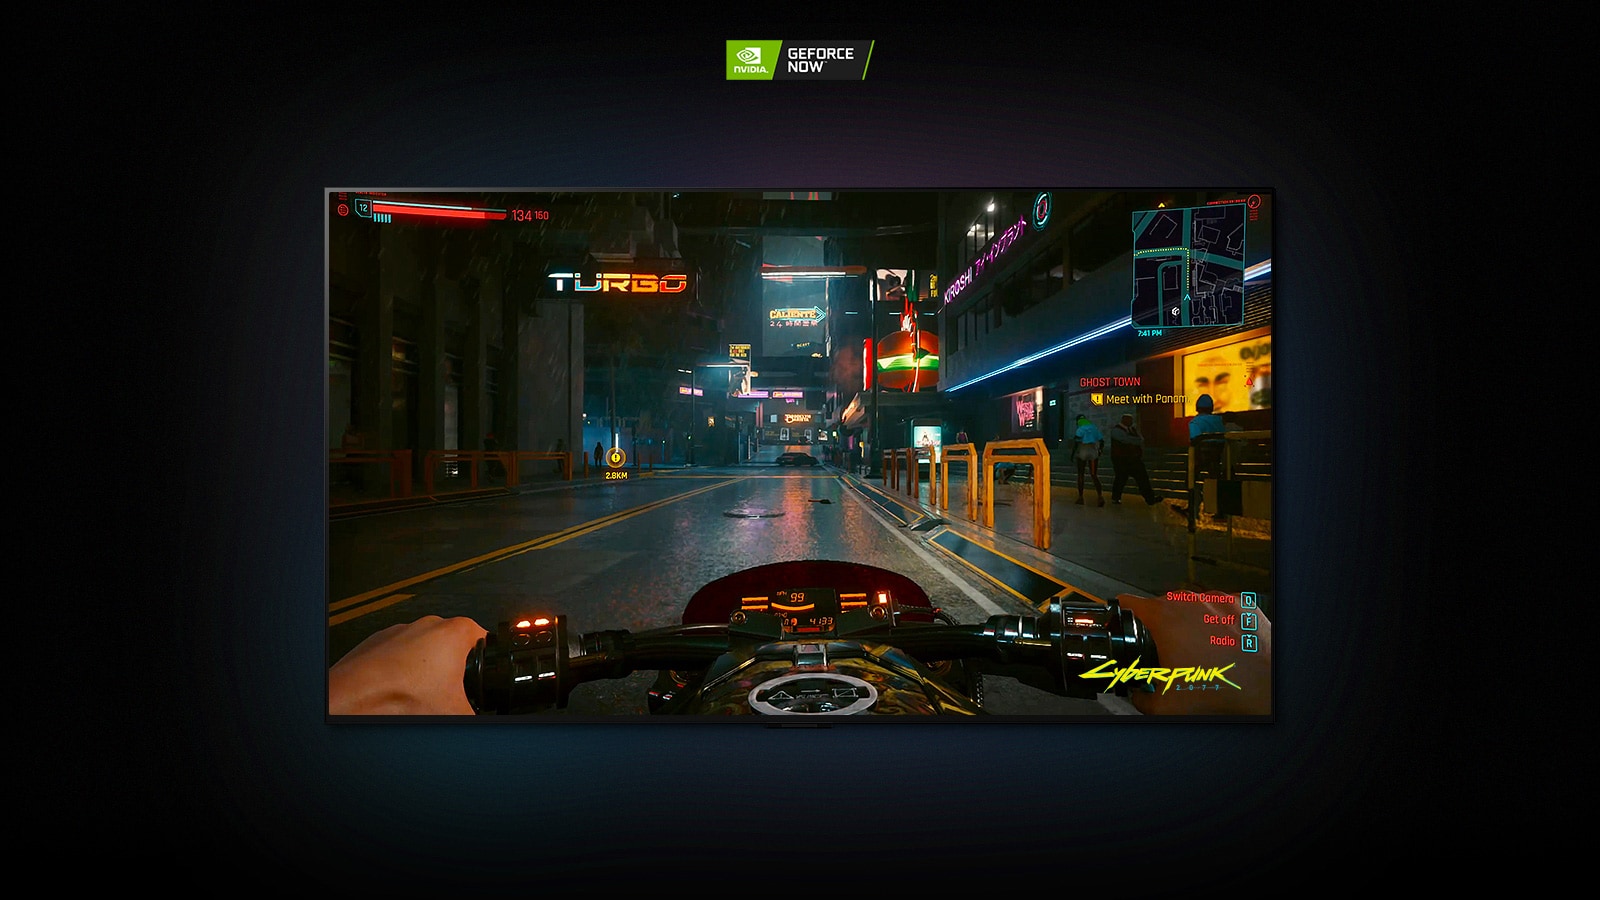 In a scene from Cyberpunk 2077 shown on an LG OLED display, the player drives through a neon-lit street on a motorbike.